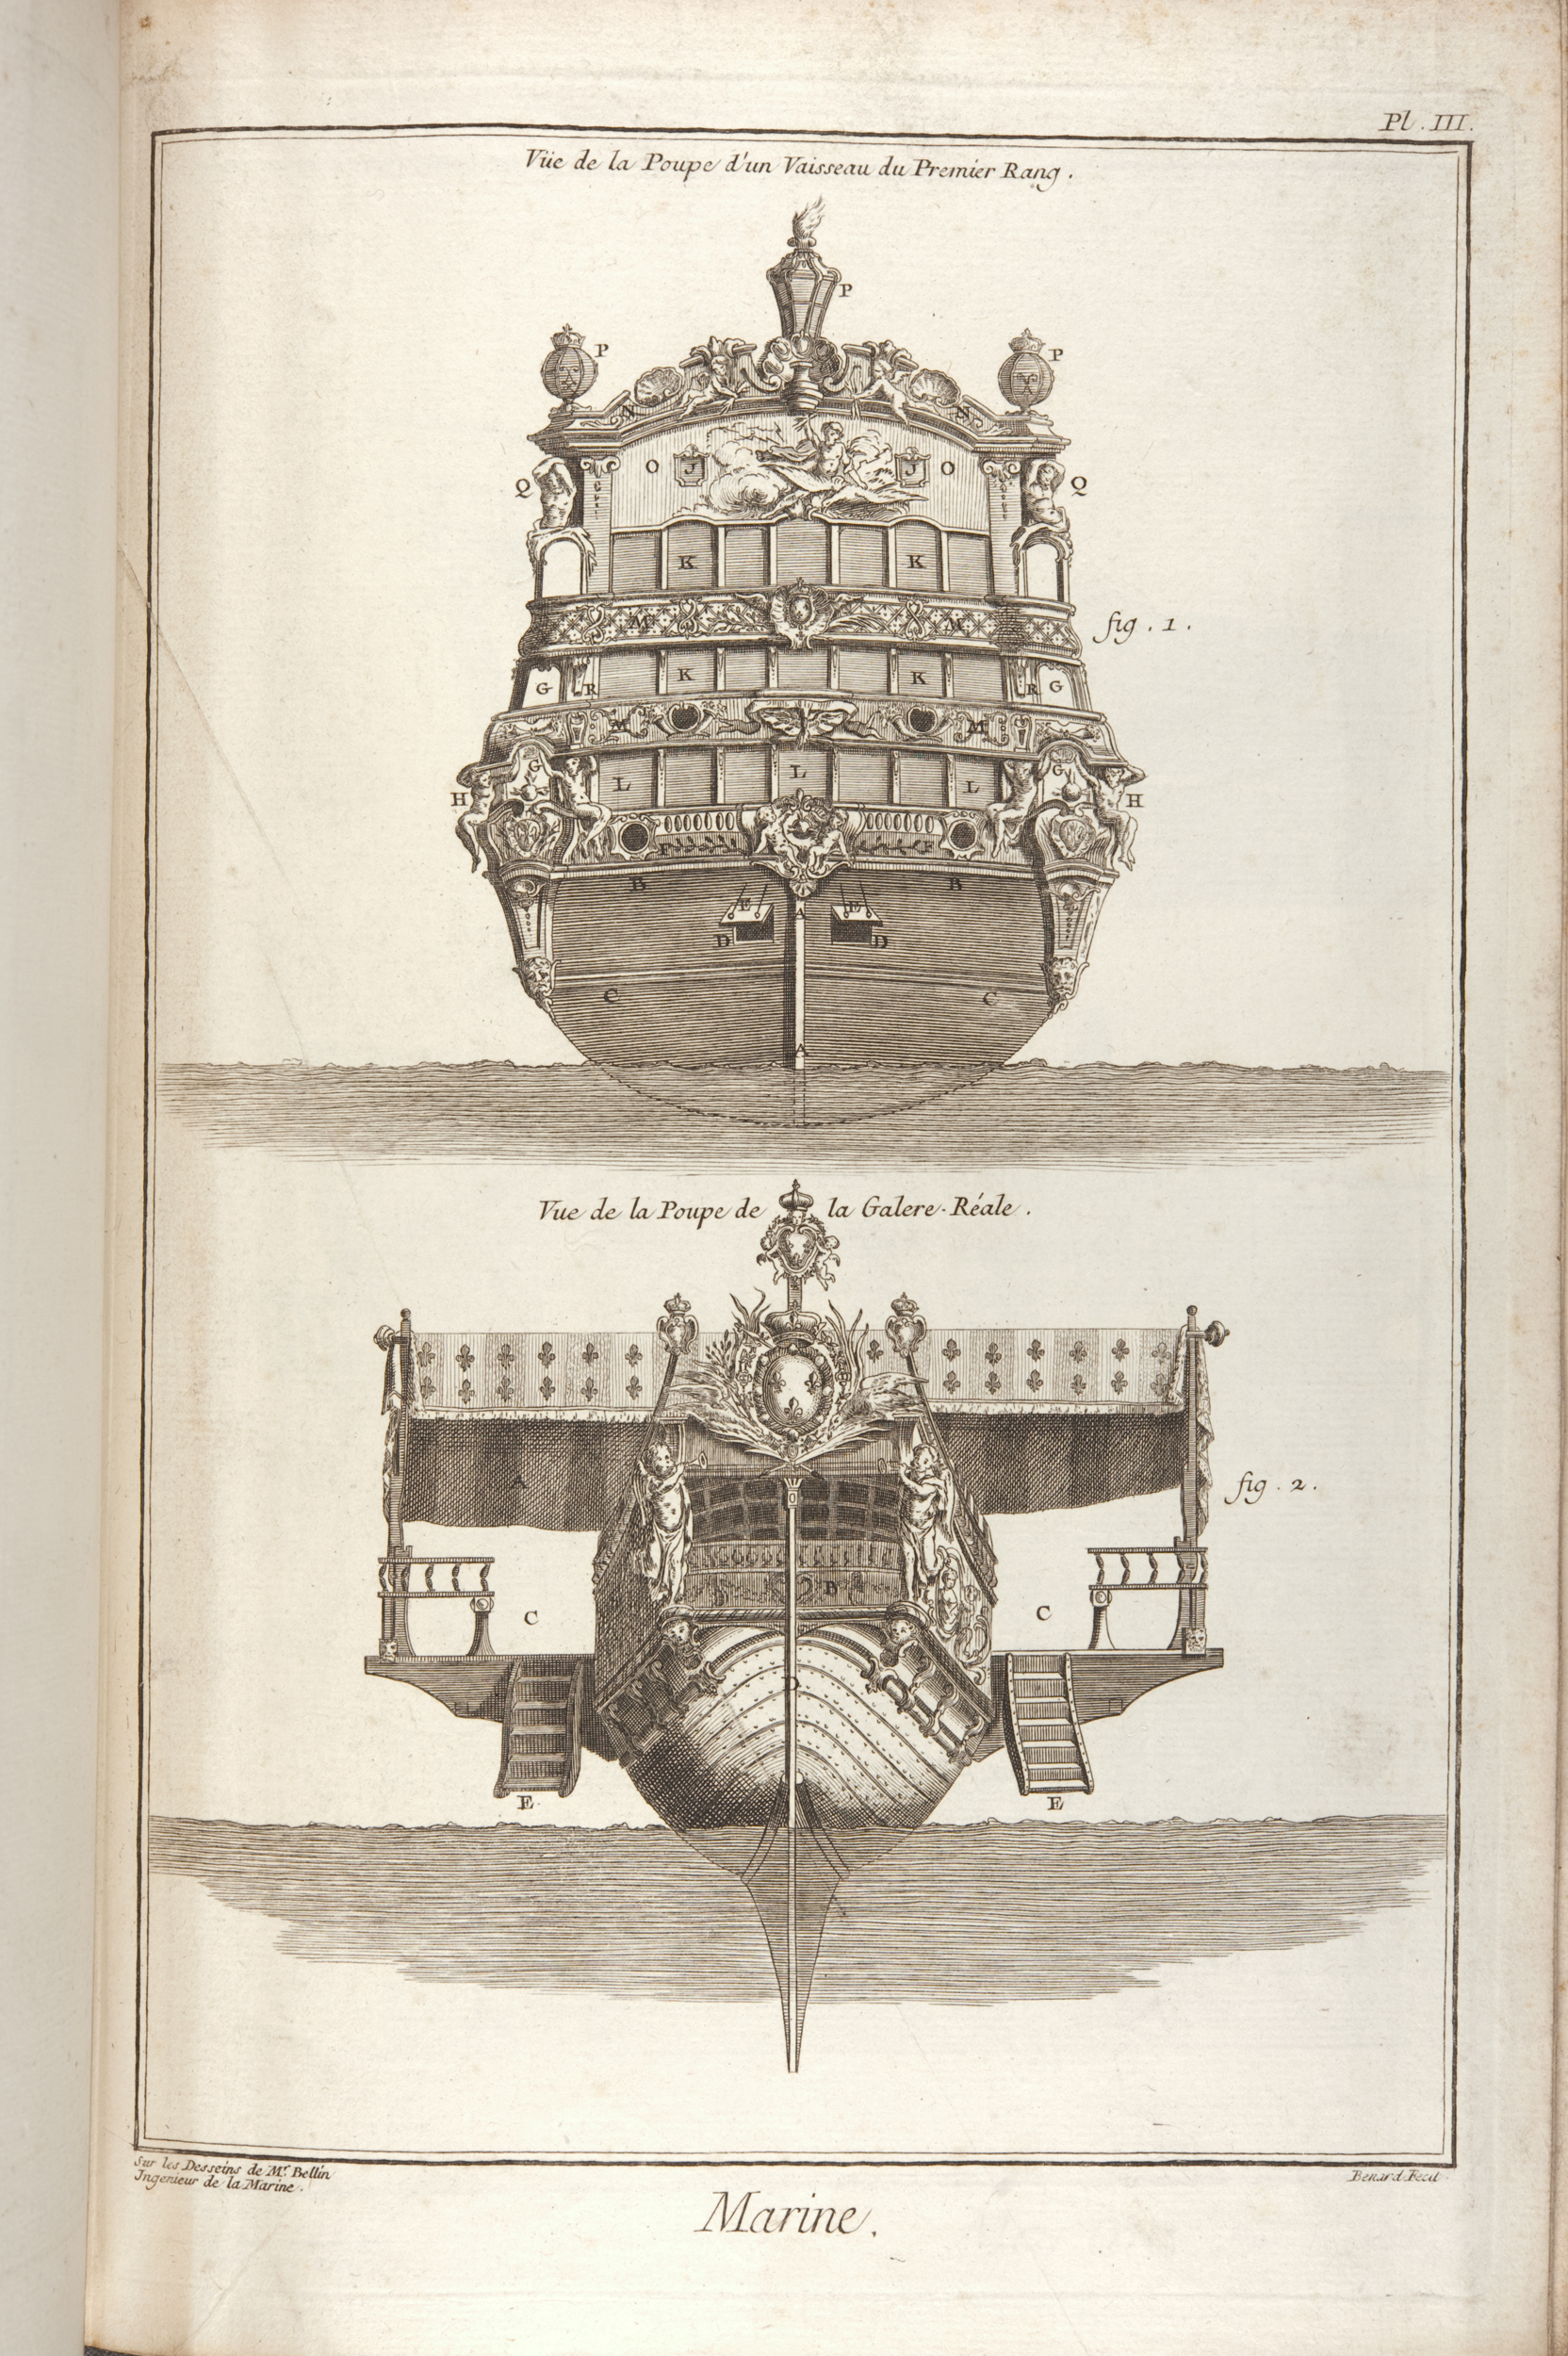 Plate depicting "Marine" (ship building) from Diderot & d’Alembert’s Encyclopédie (St Andrews copy at =sf AE25.D5)